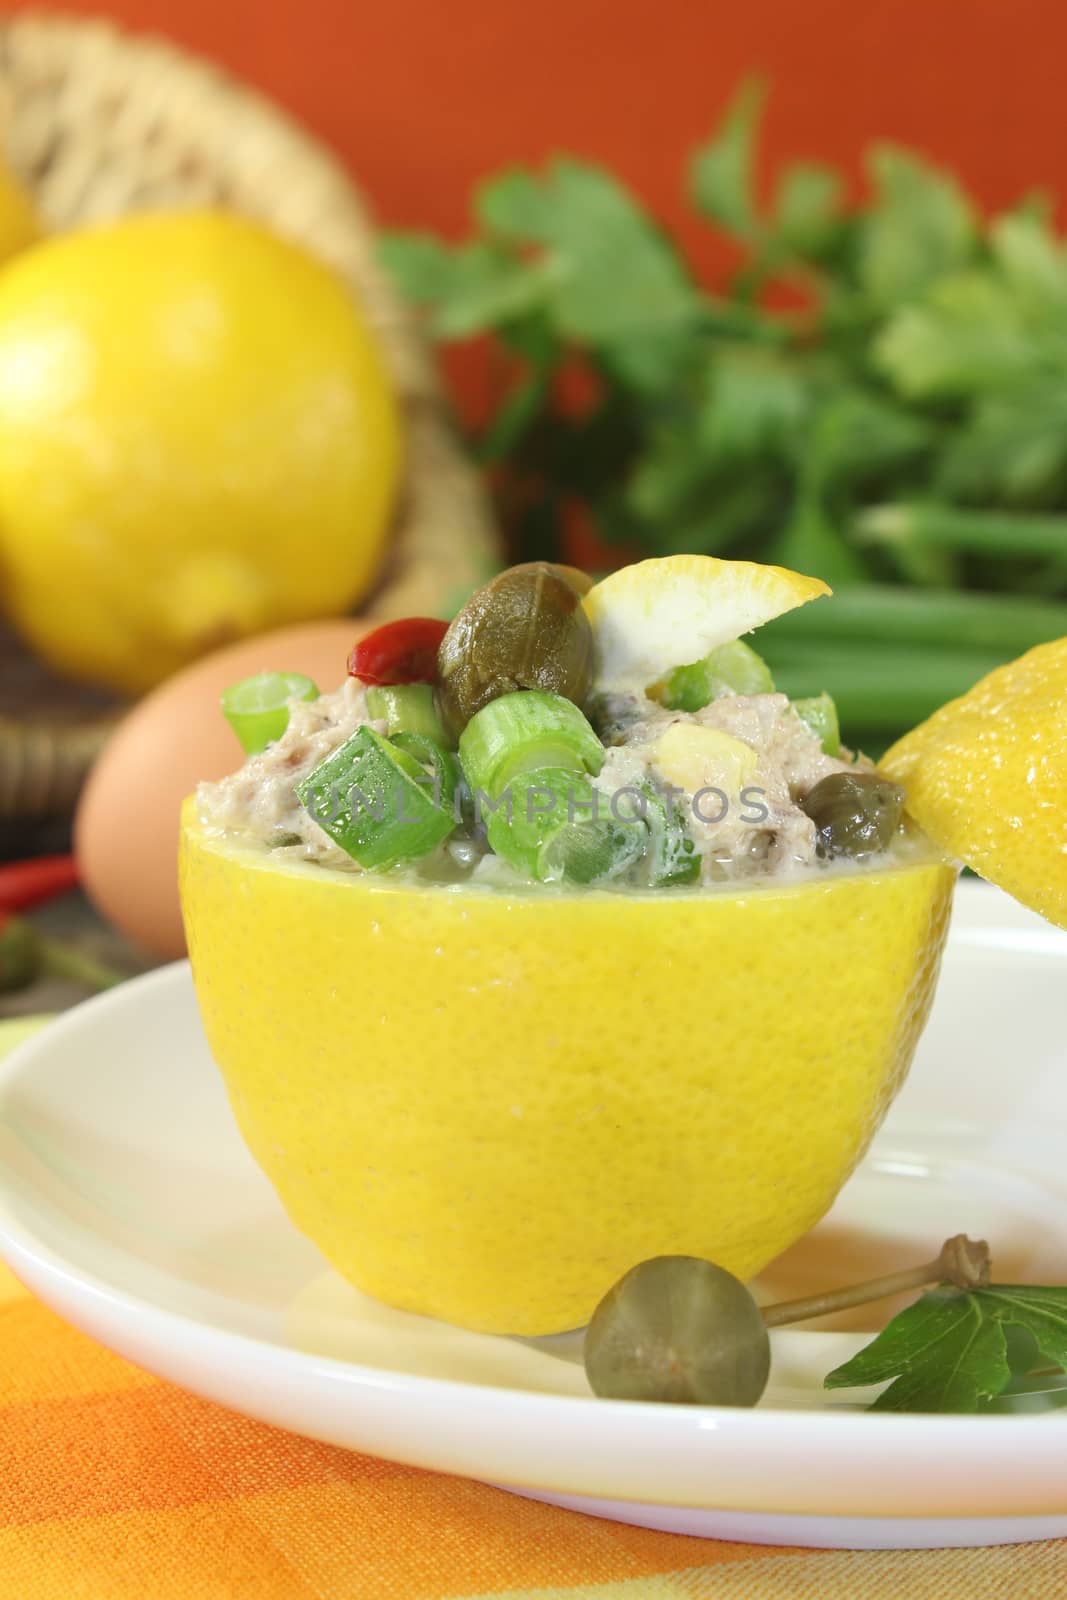 stuffed Lemons with parsley by discovery